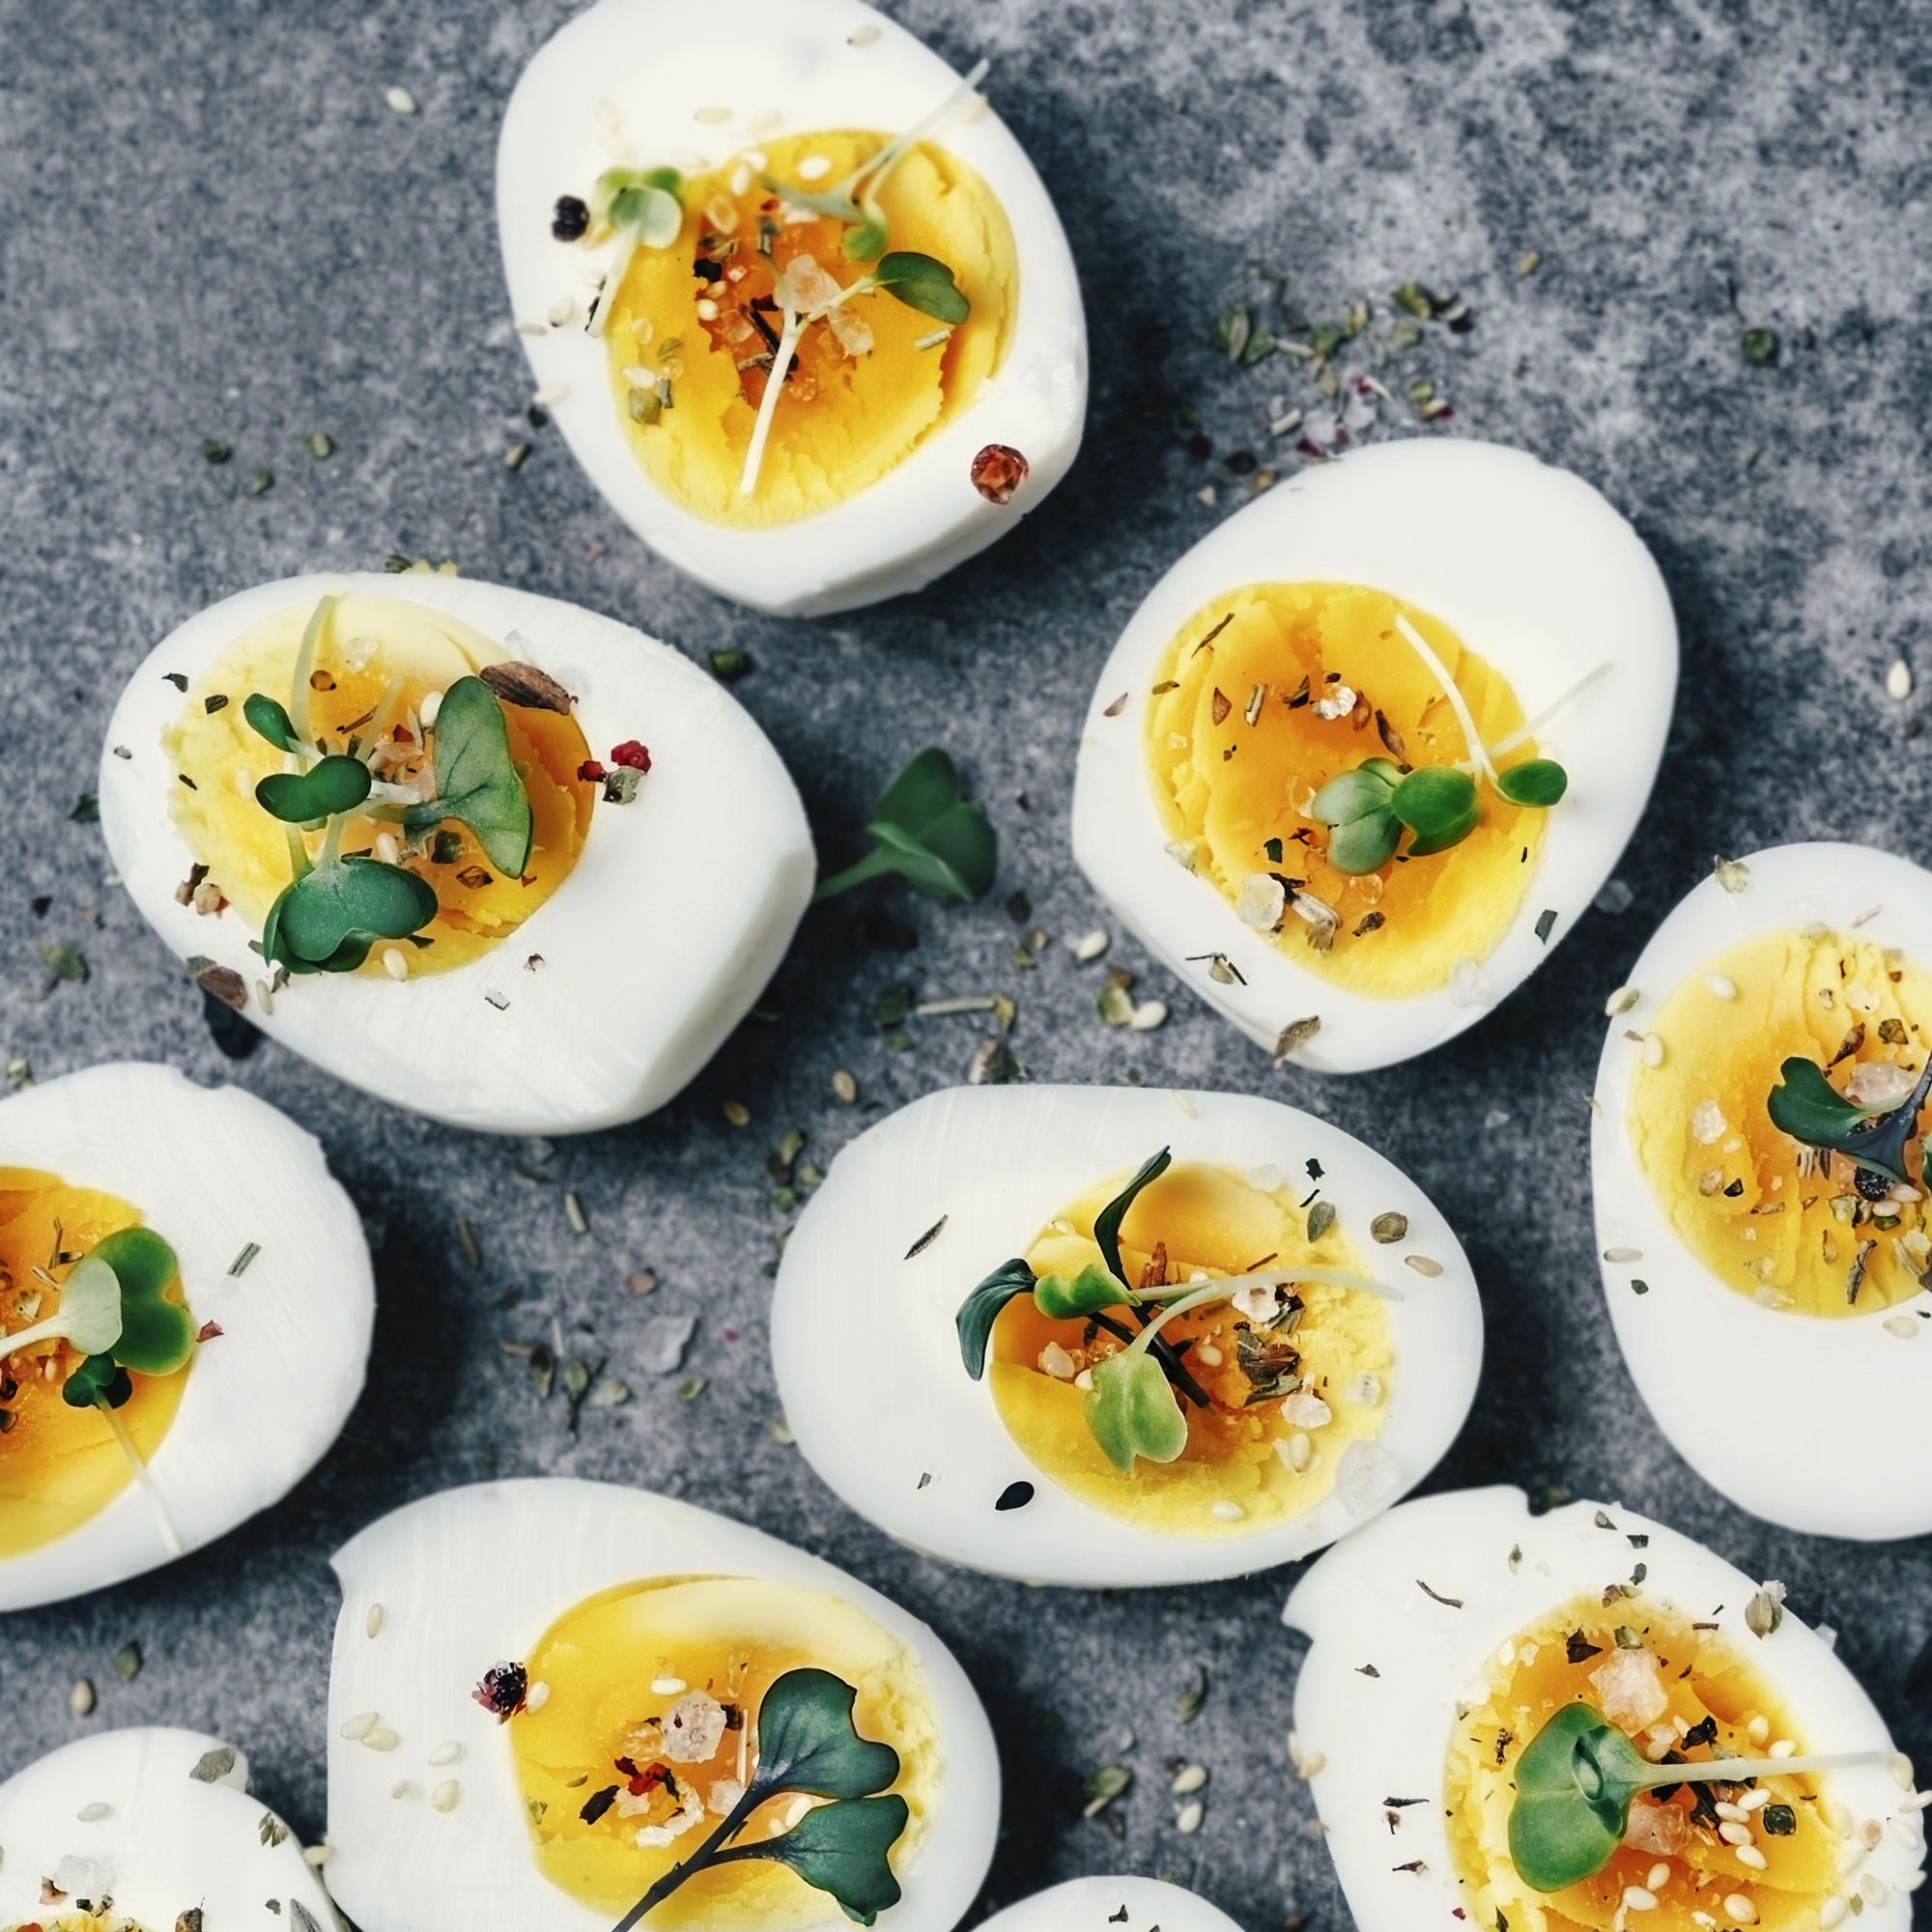 27 Health and Nutrition Tips That Are Evidence-Based (2022) Eat Whole Eggs